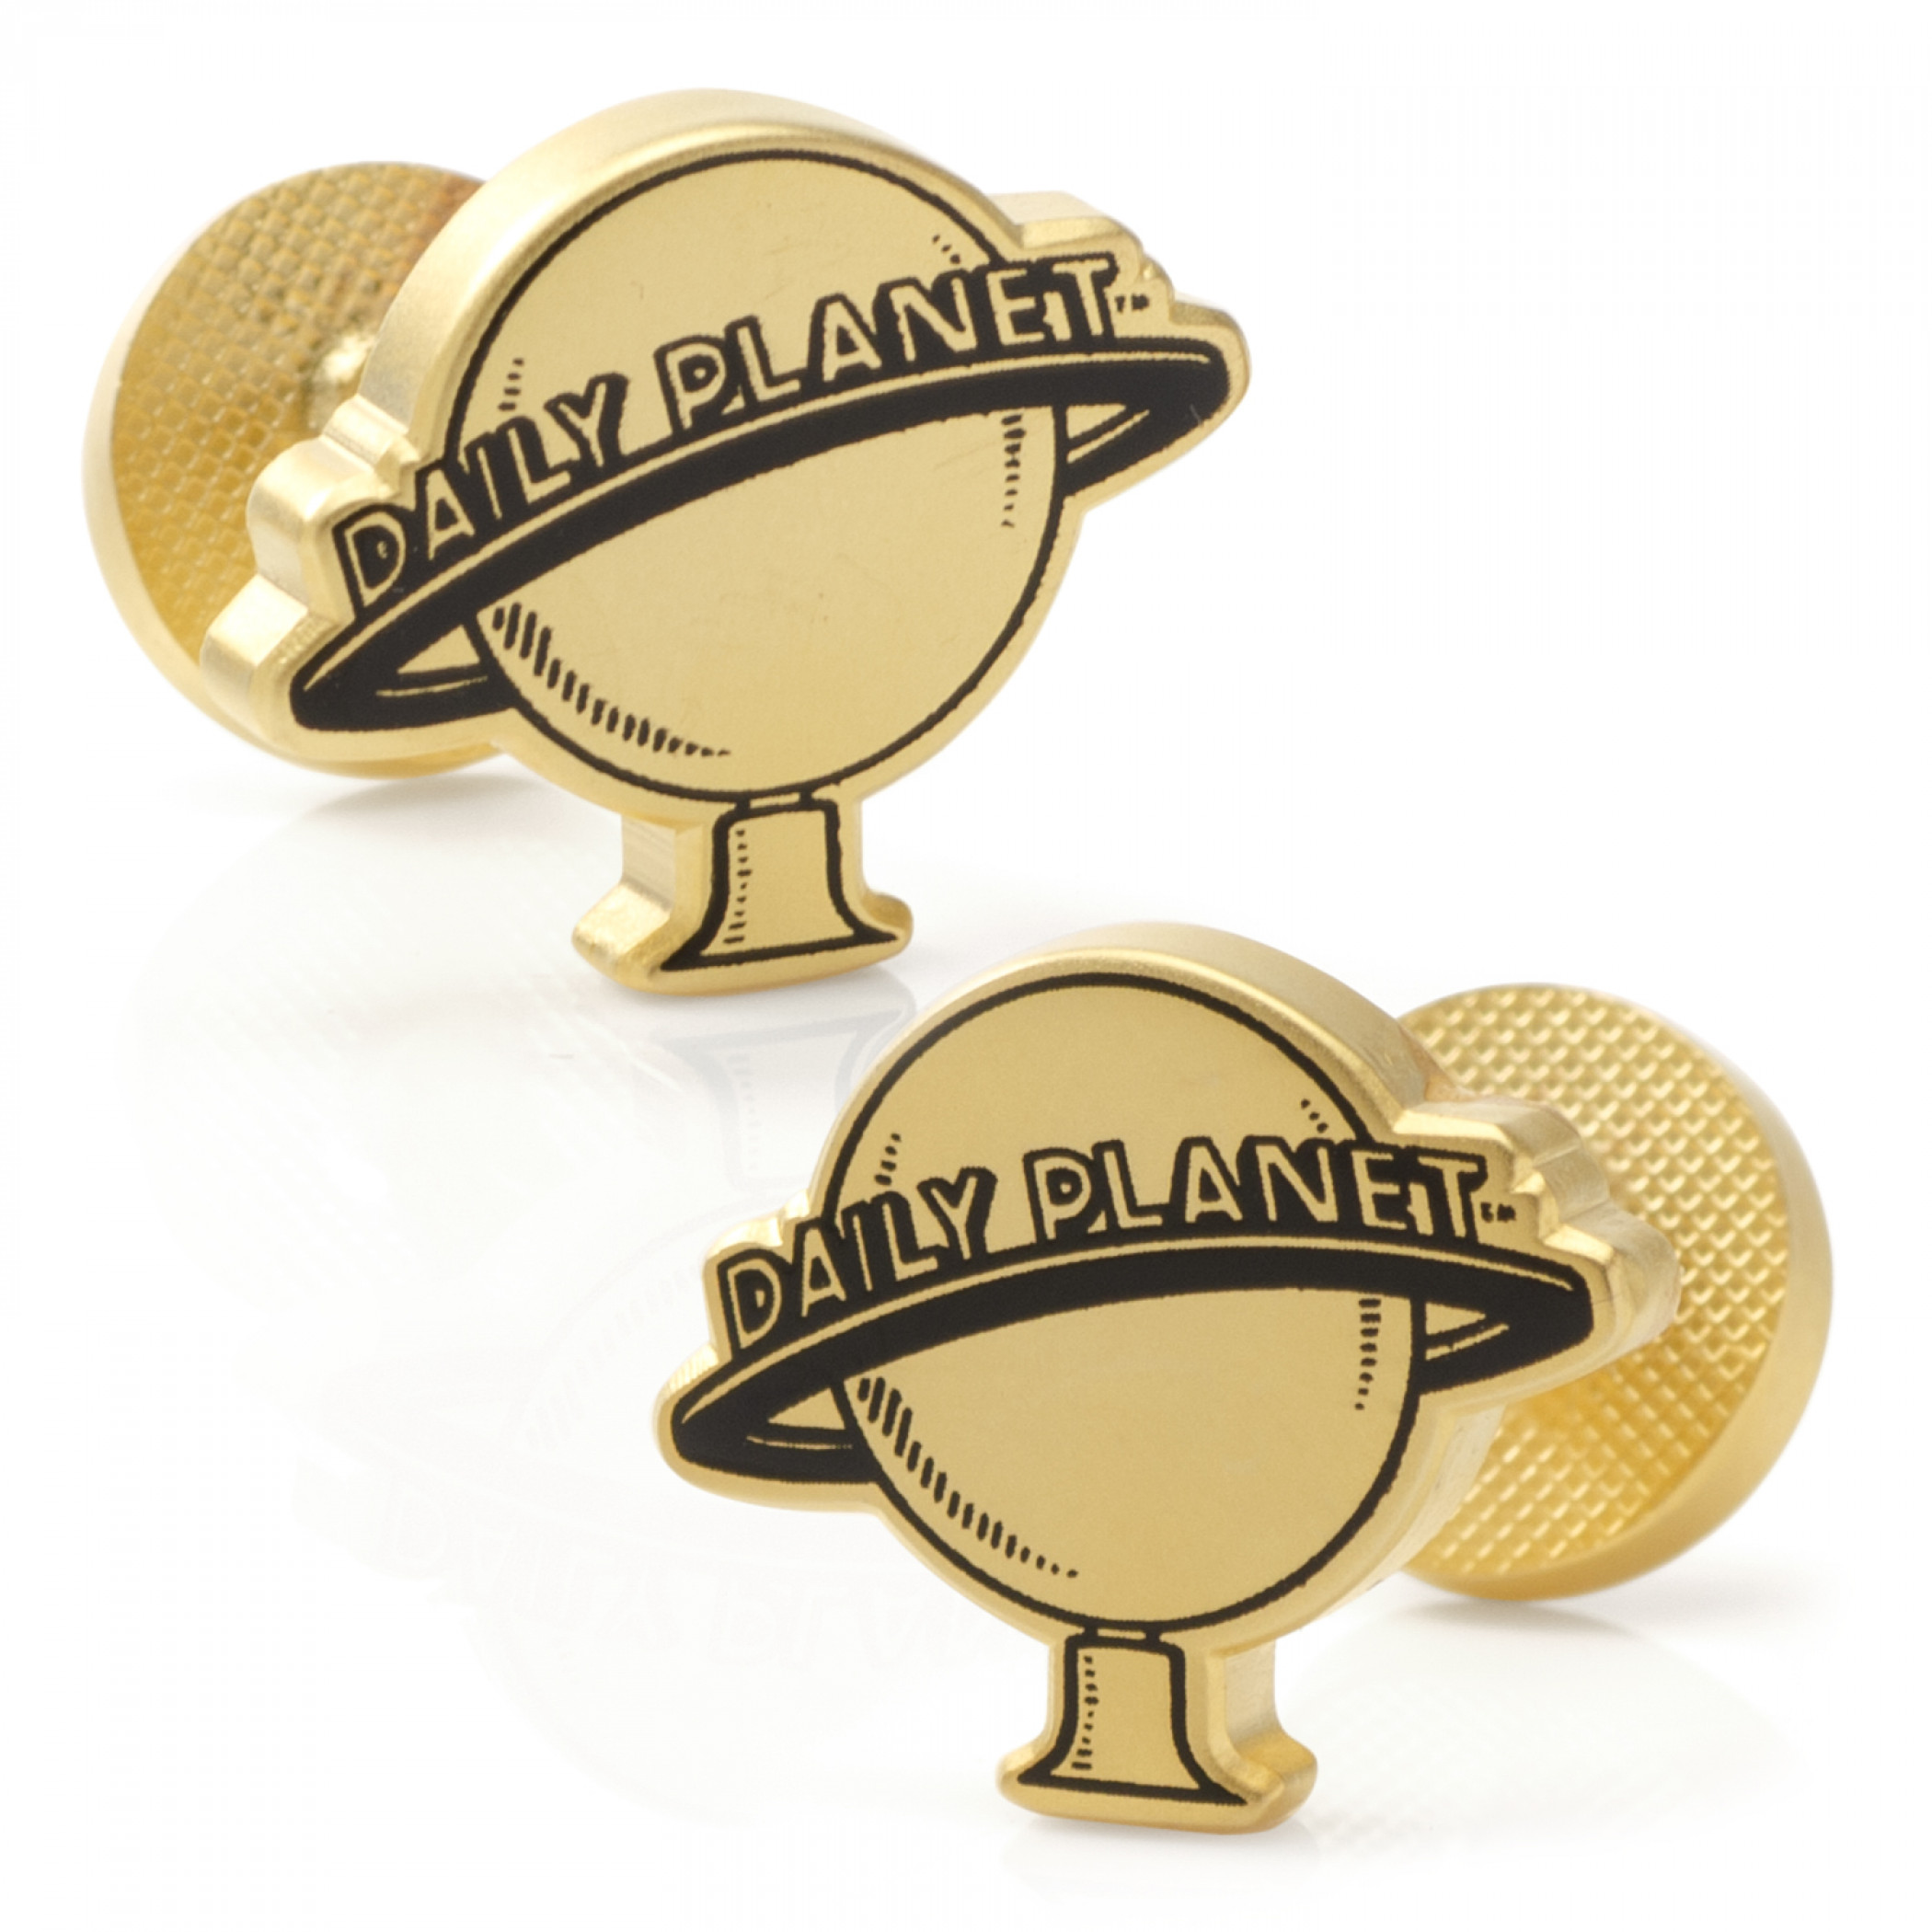 The Daily Planet Gold Cufflinks